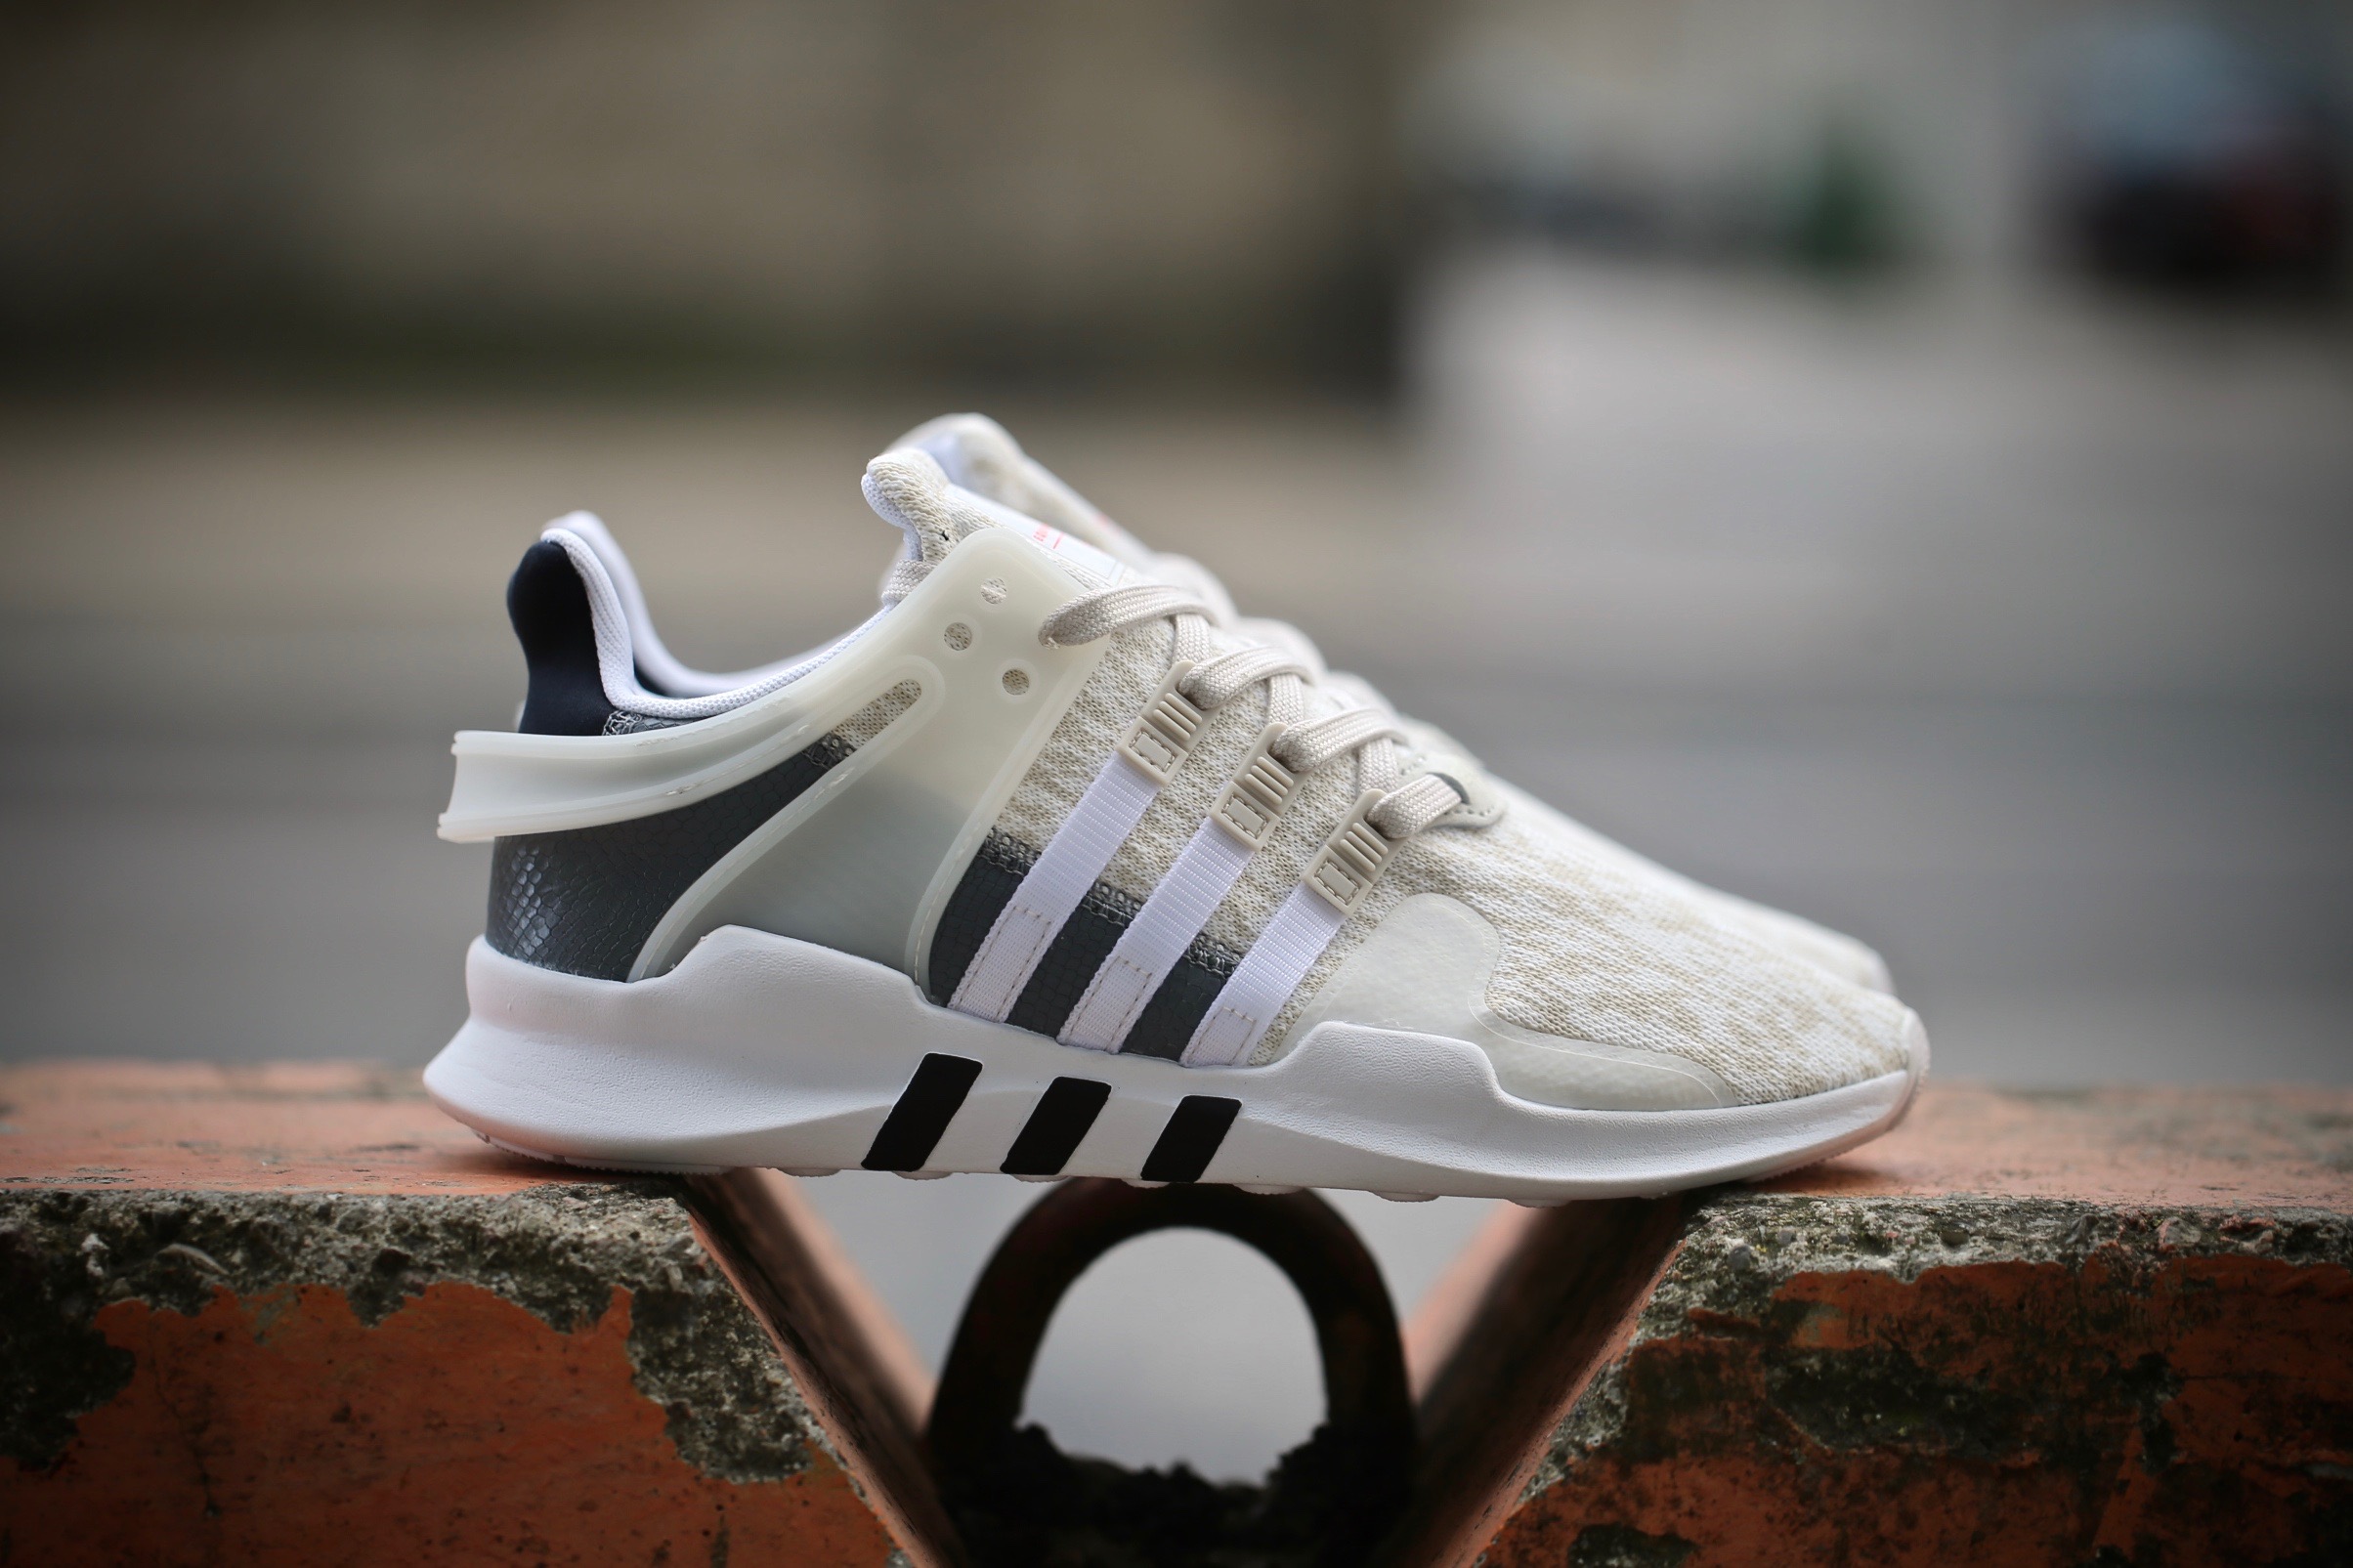 Sneeuwstorm meesteres Additief adidas Originals EQT Support ADV W – Clear Brown / Ftwr White / Grey – STASP